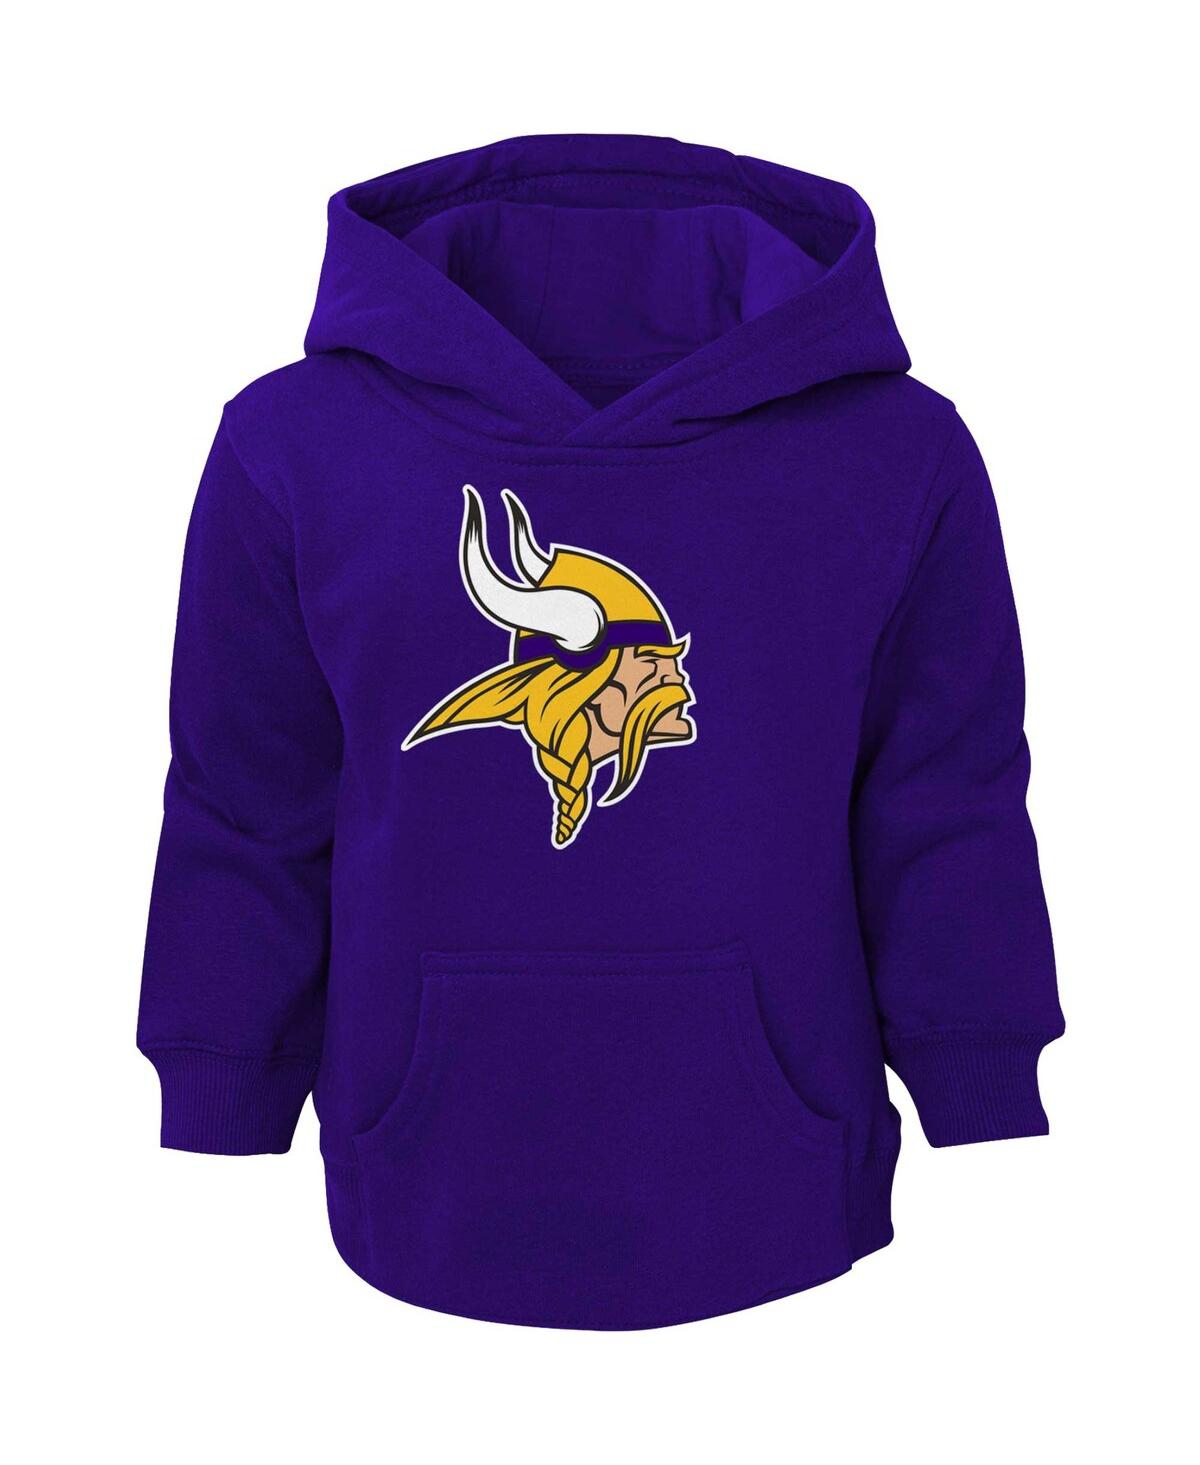 Shop Outerstuff Toddler Boys And Girls Purple Minnesota Vikings Logo Pullover Hoodie